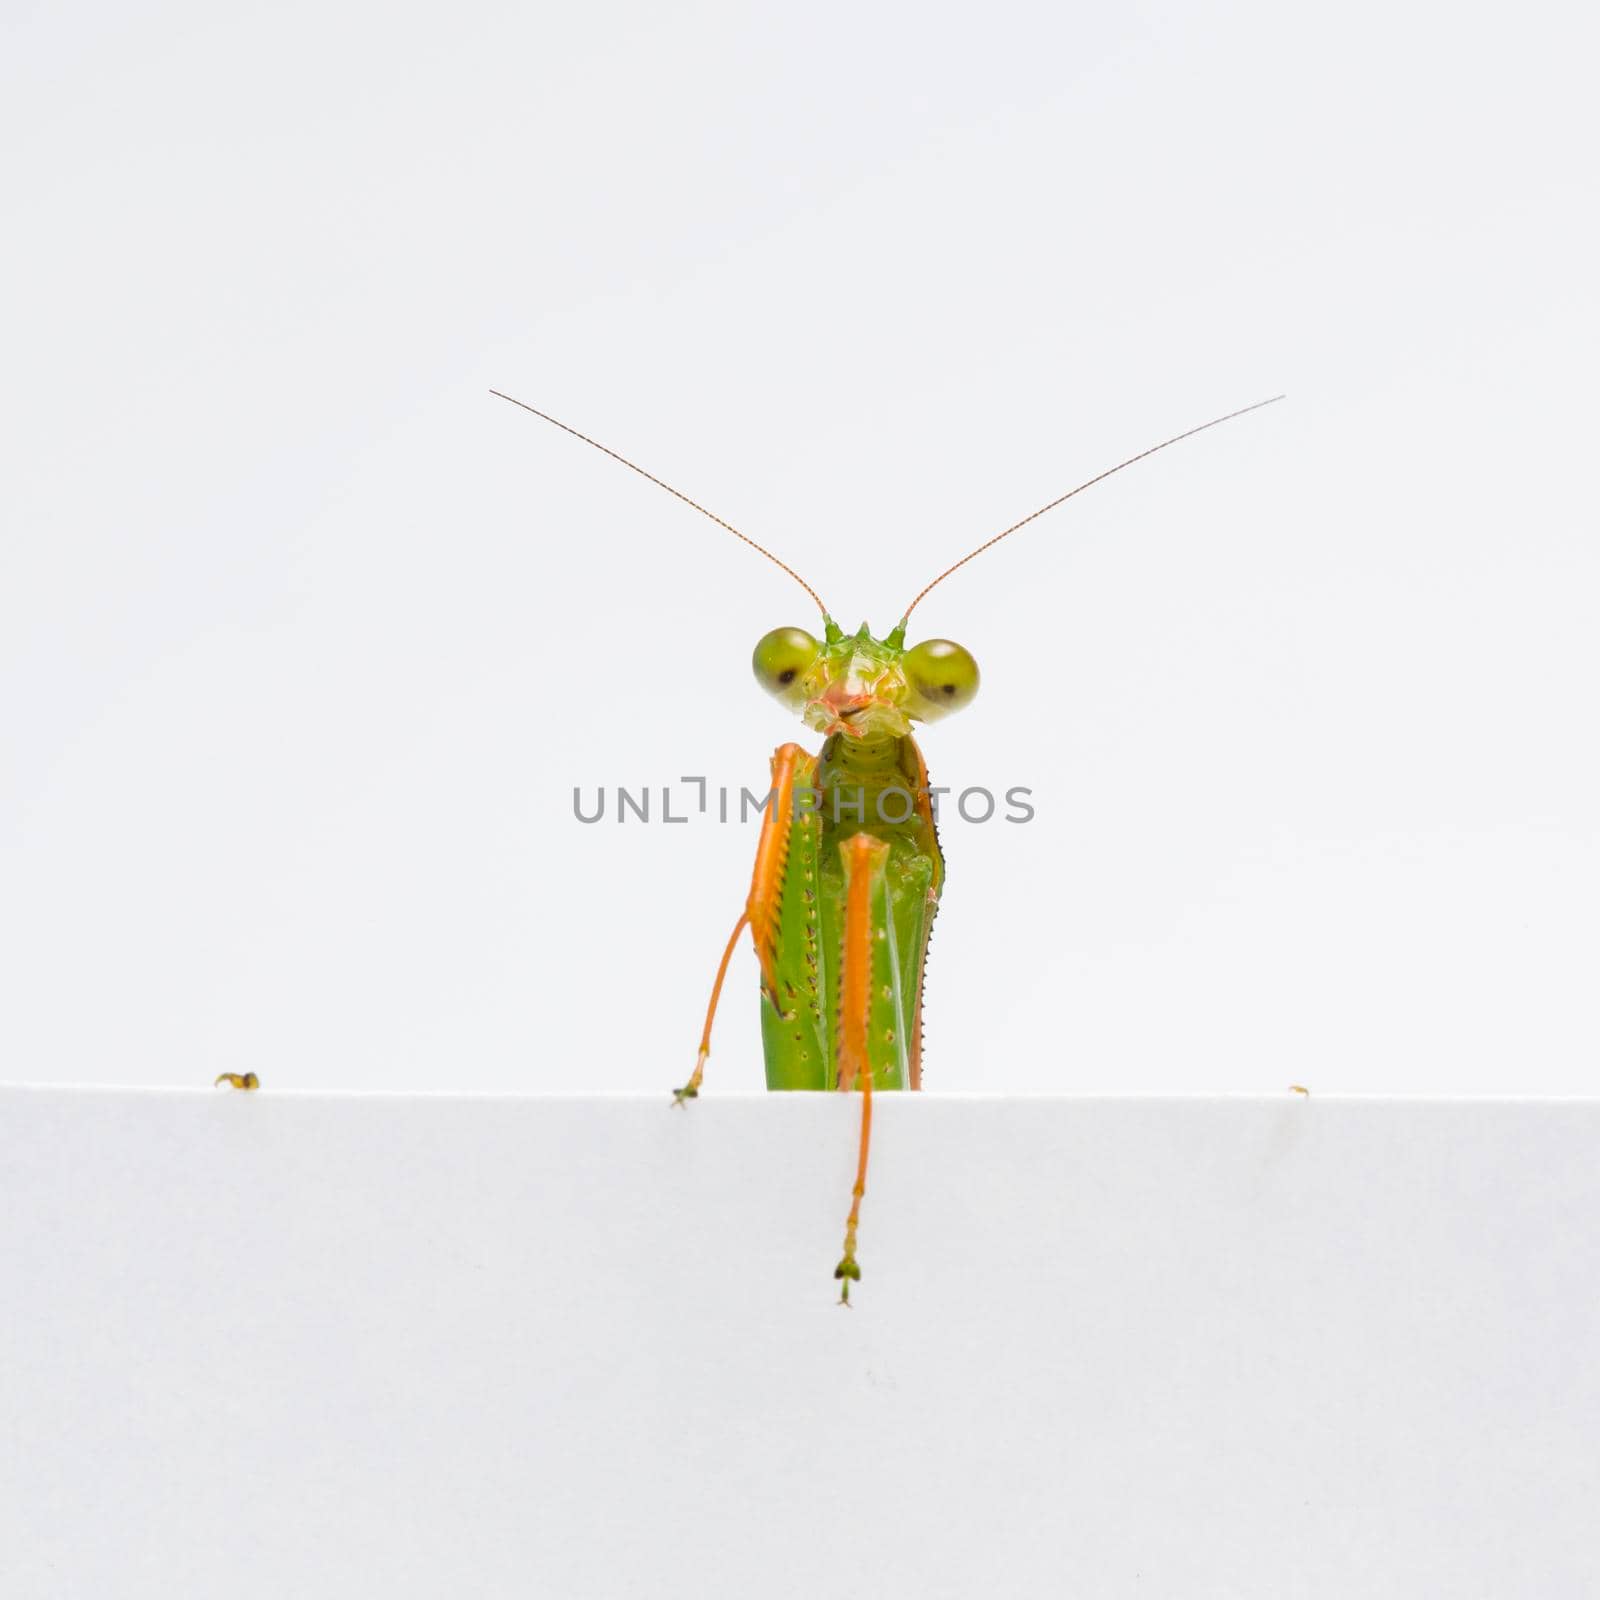 Praying Mantis. on white background by titipong